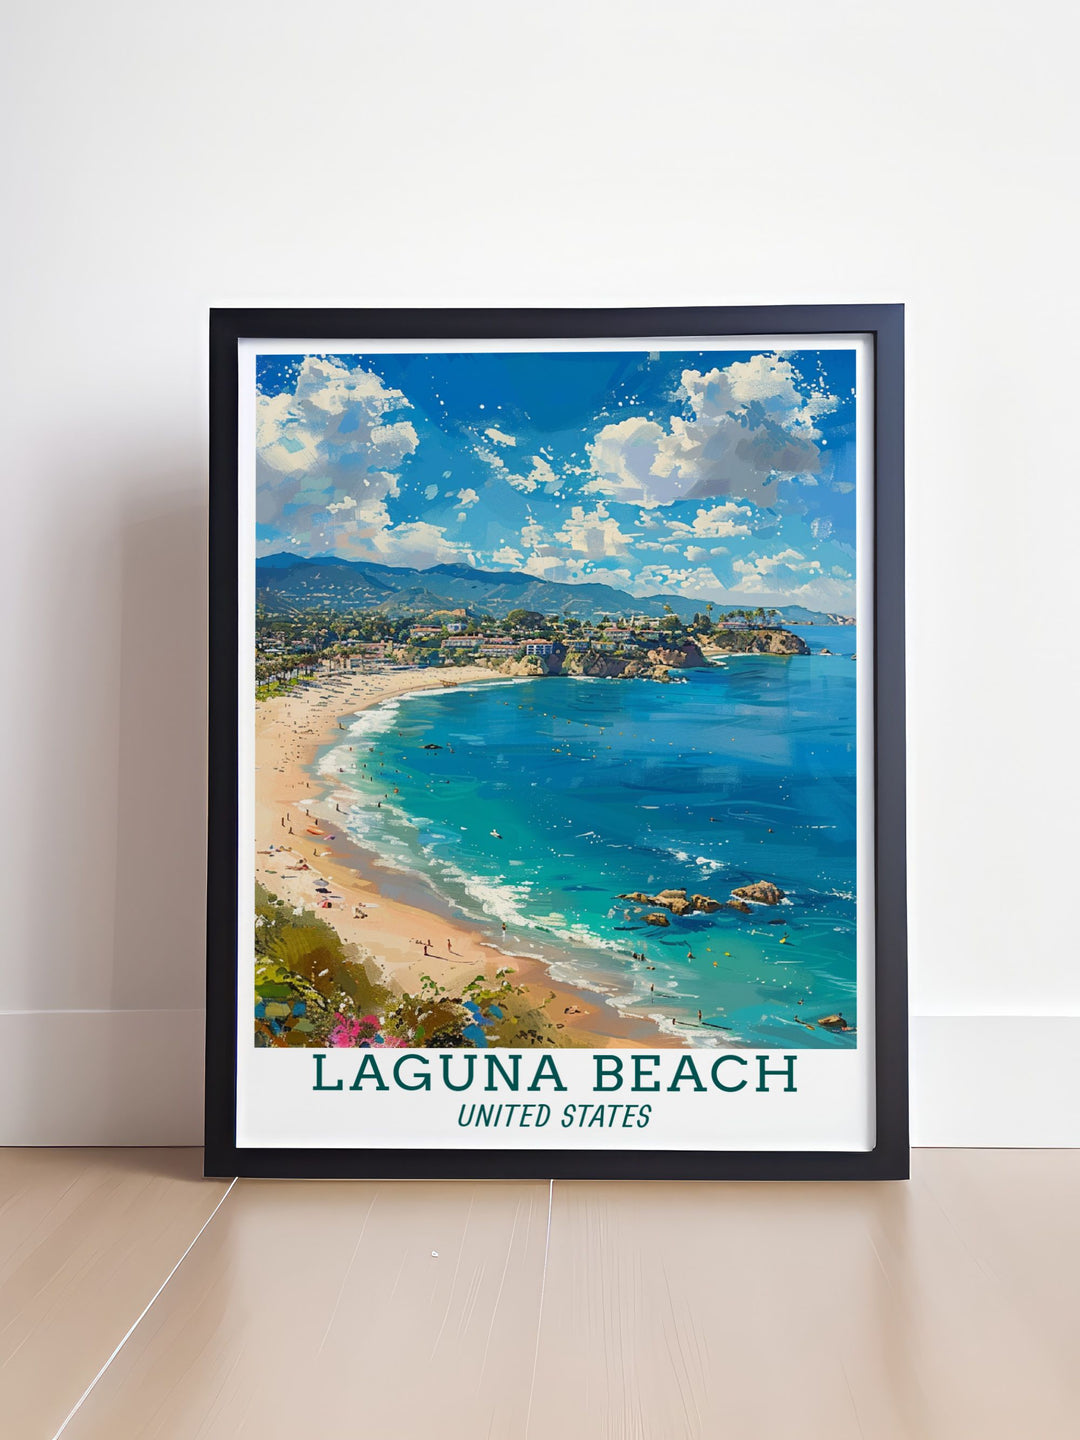 Colorful Laguna Beach Poster with Main Beach scene is a stunning piece of artwork that brings the beauty of Laguna Beach into your home perfect for gifts and wall decor.